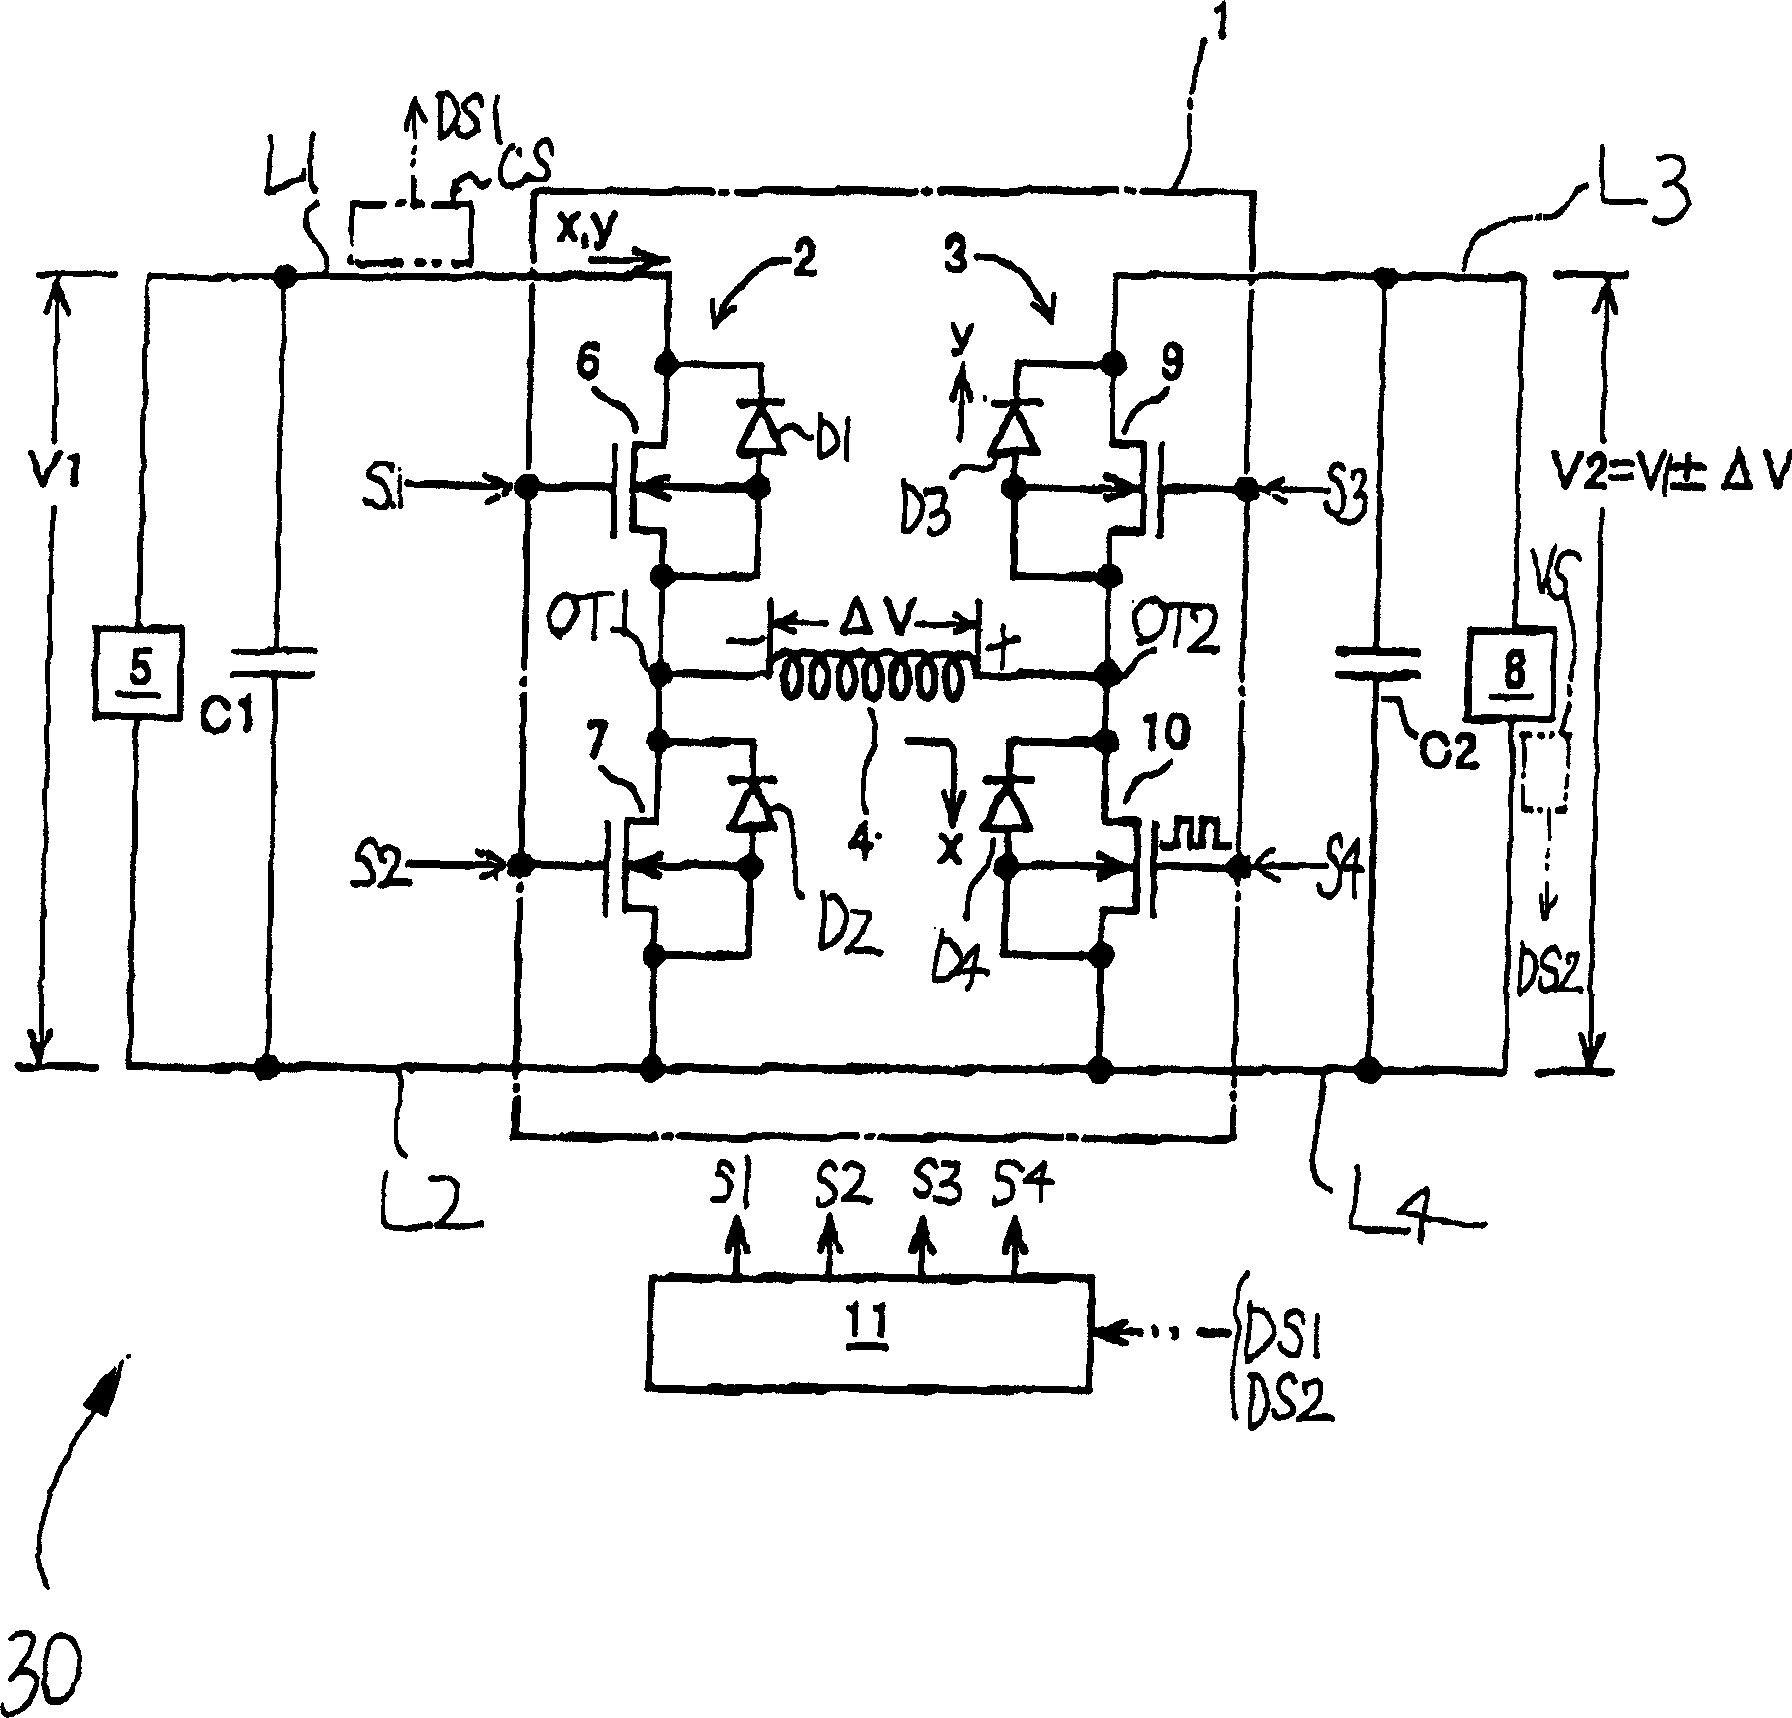 Reversible back-boost chopper circuit, and inverter circuit with the same